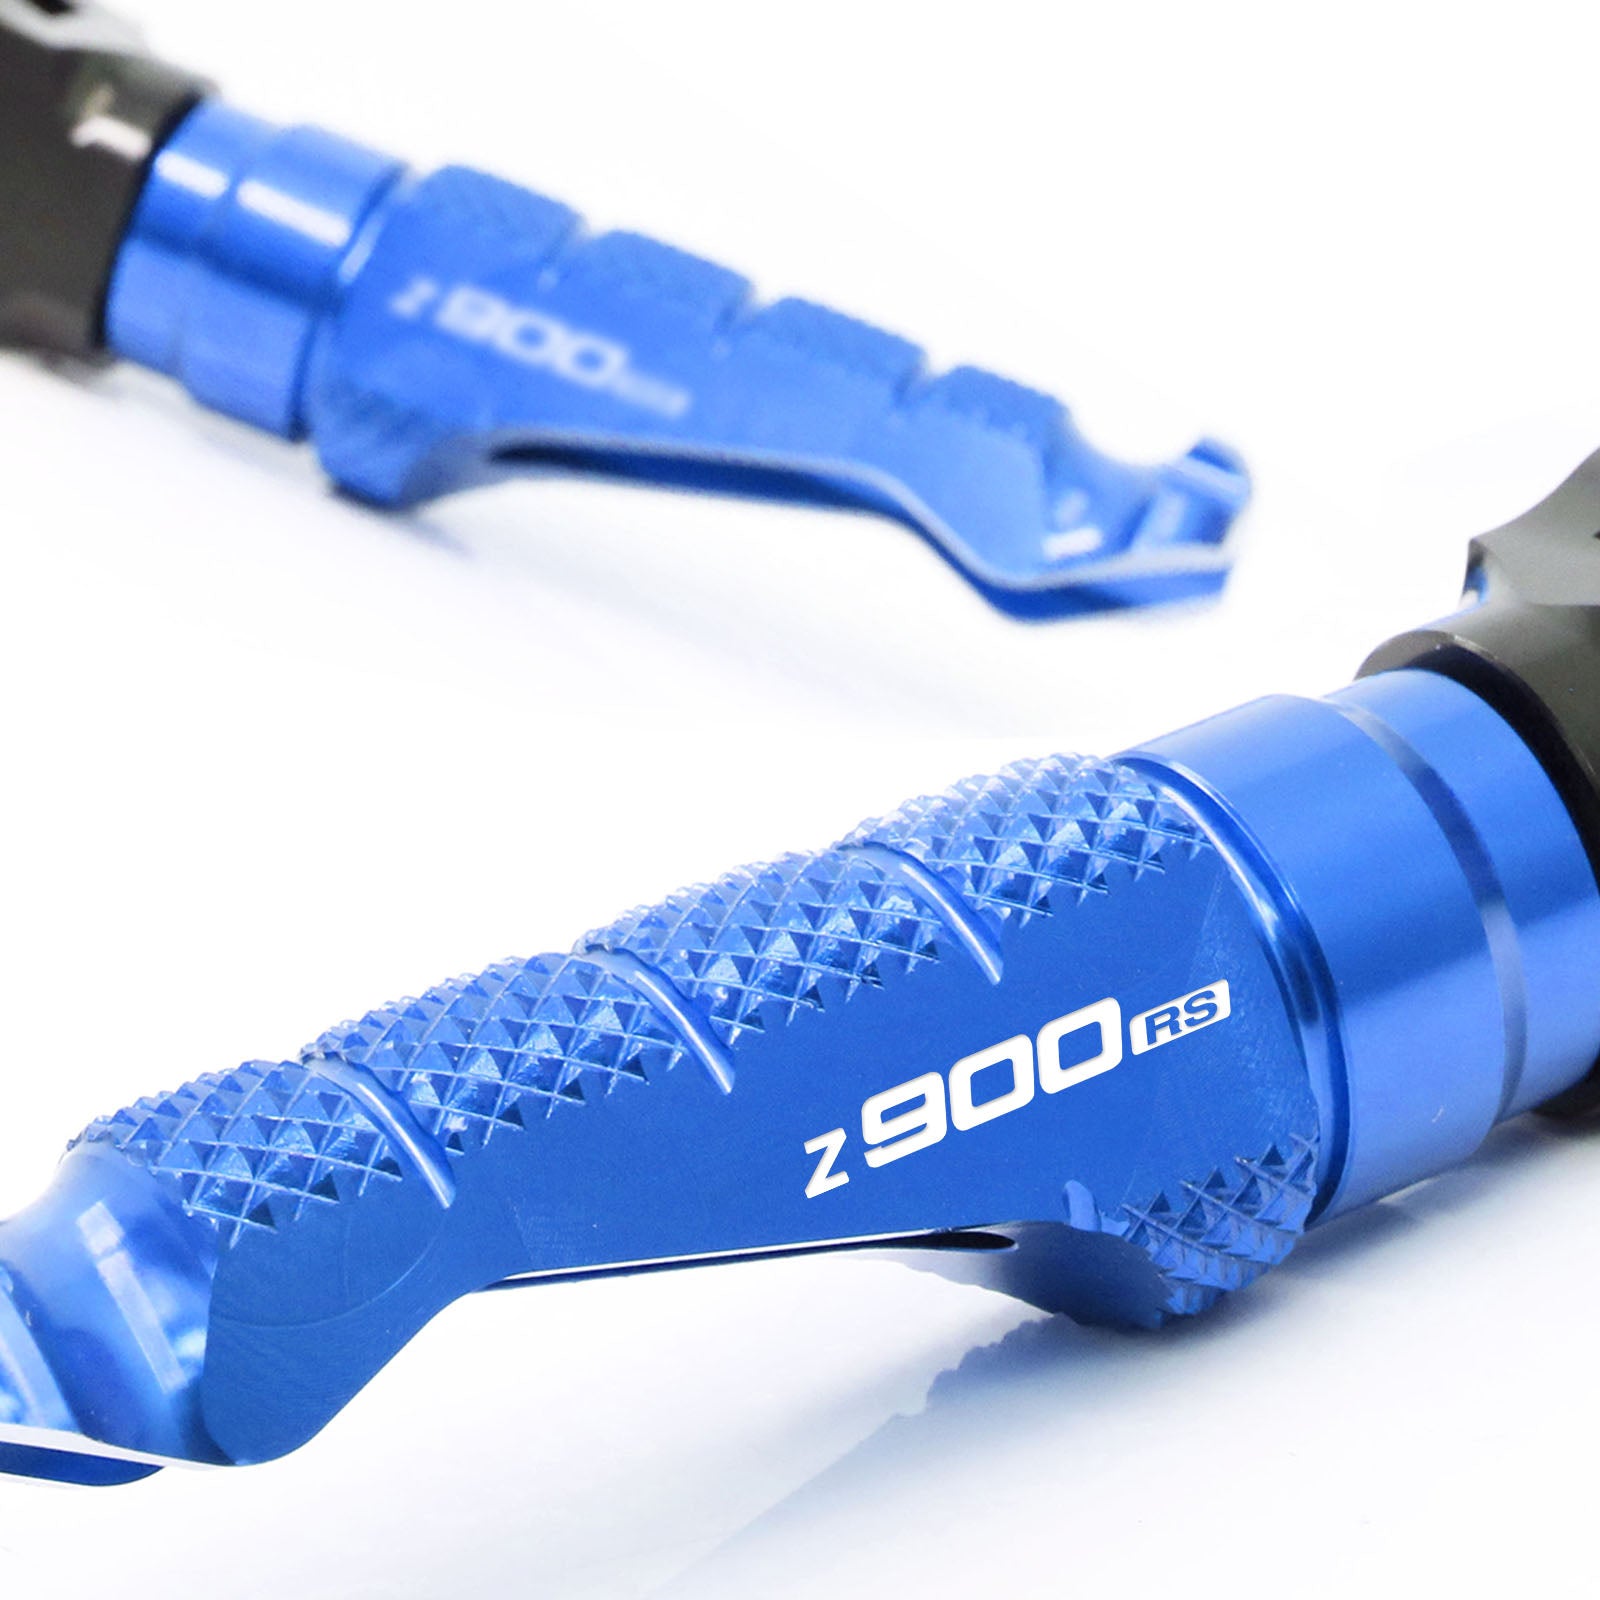 Kawasaki Z900RS Caf?Racer logo engraved front Blue Foot Pegs